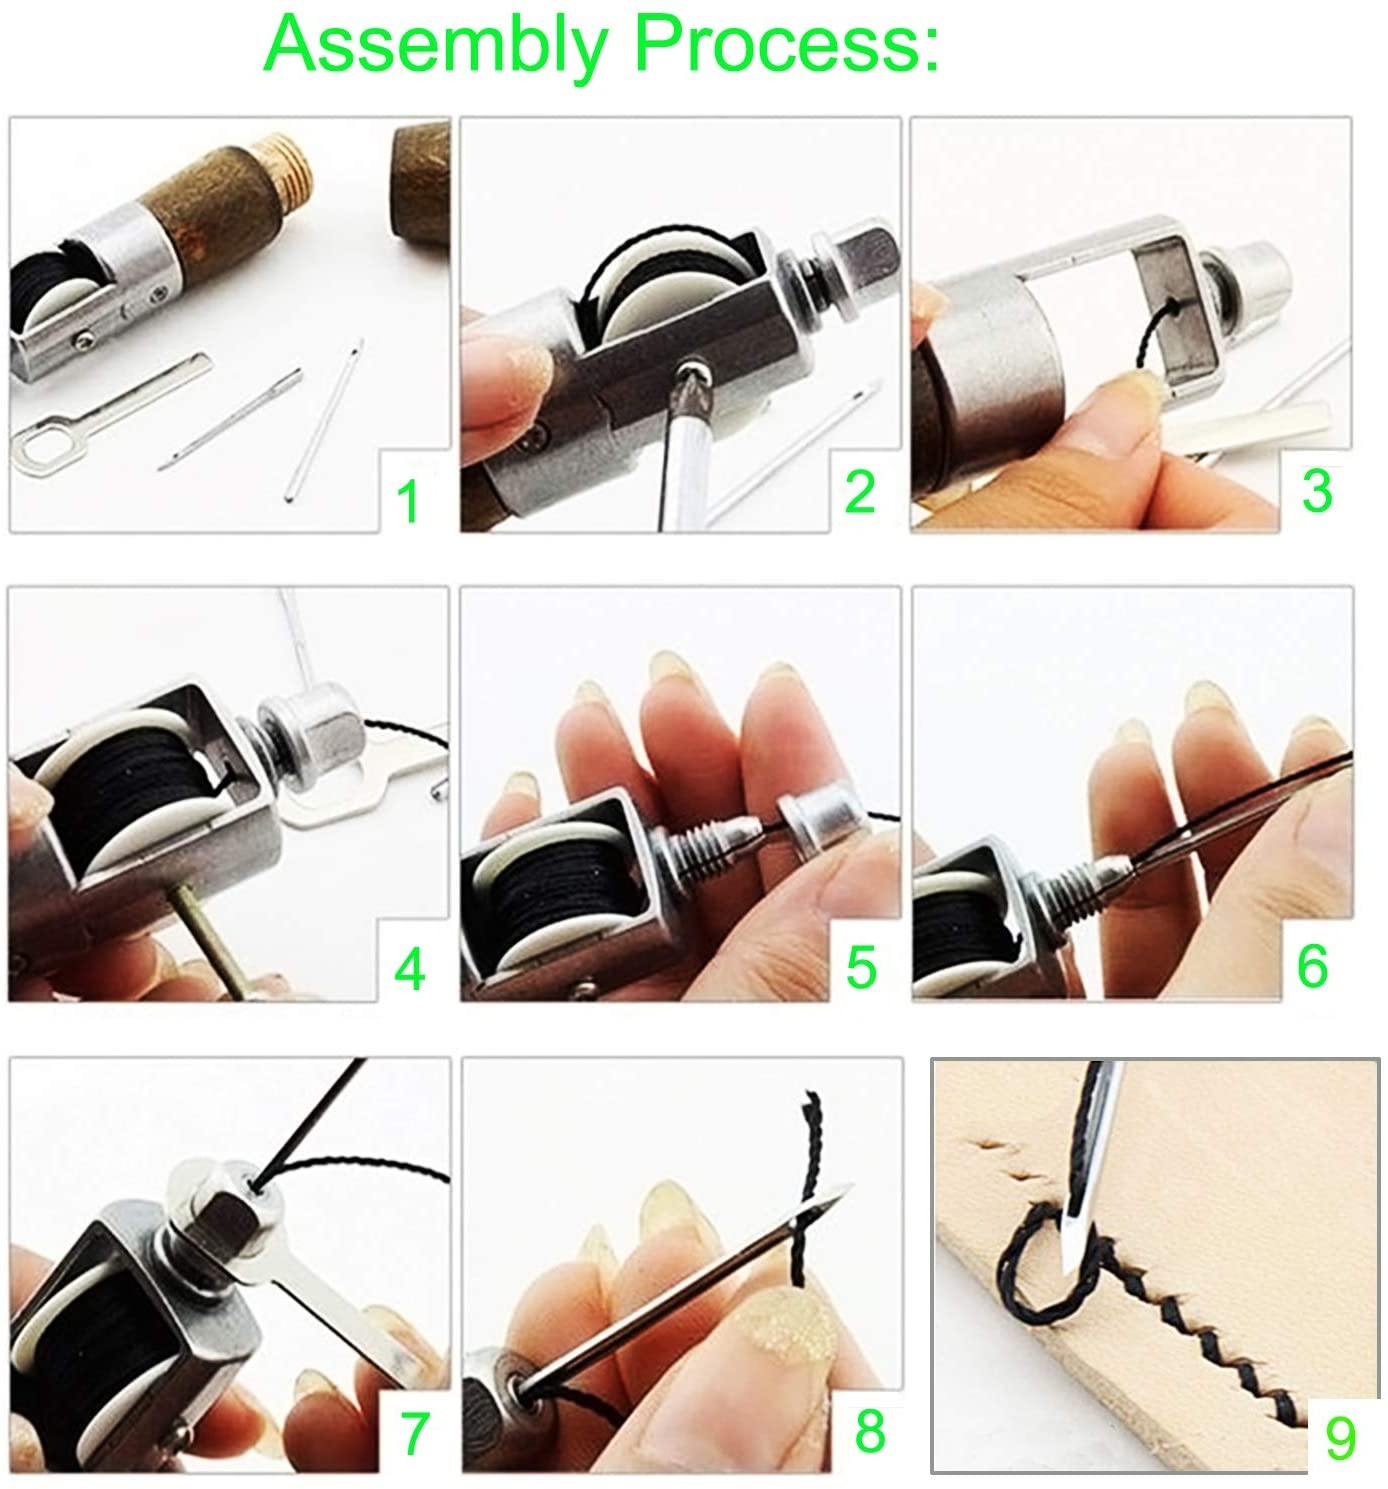 How to Use the Stitching Awl 